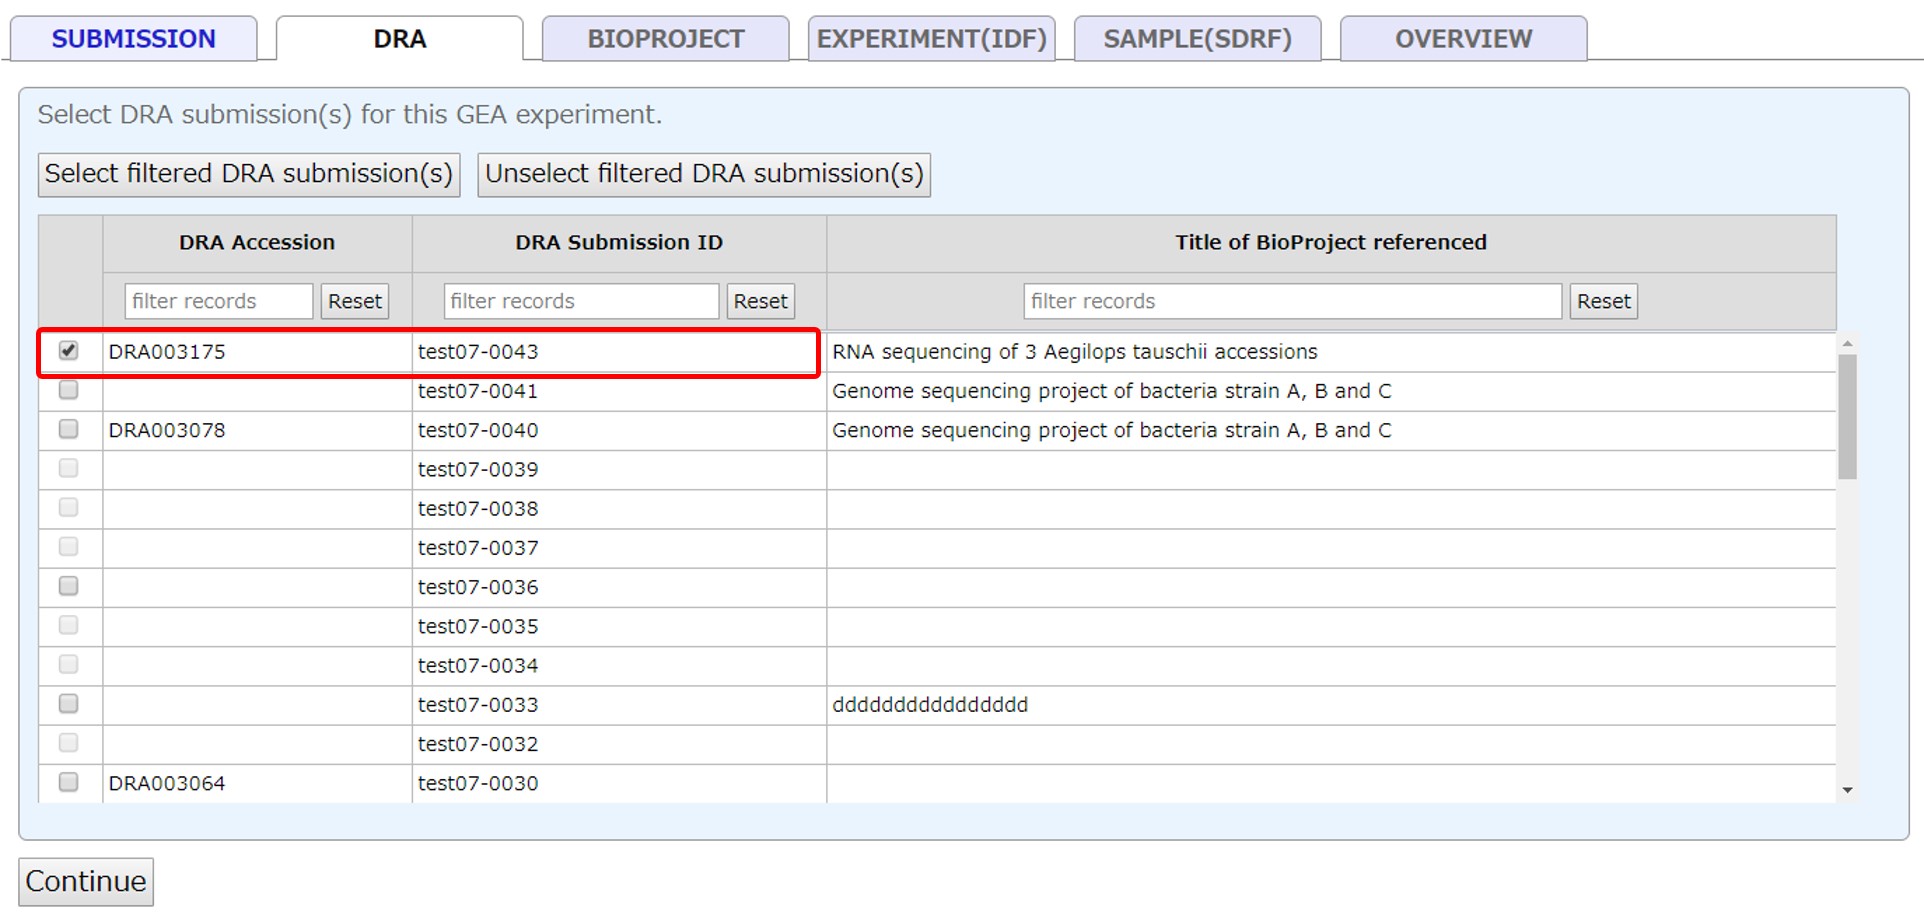 Select a DRA submission for the GEA experiment